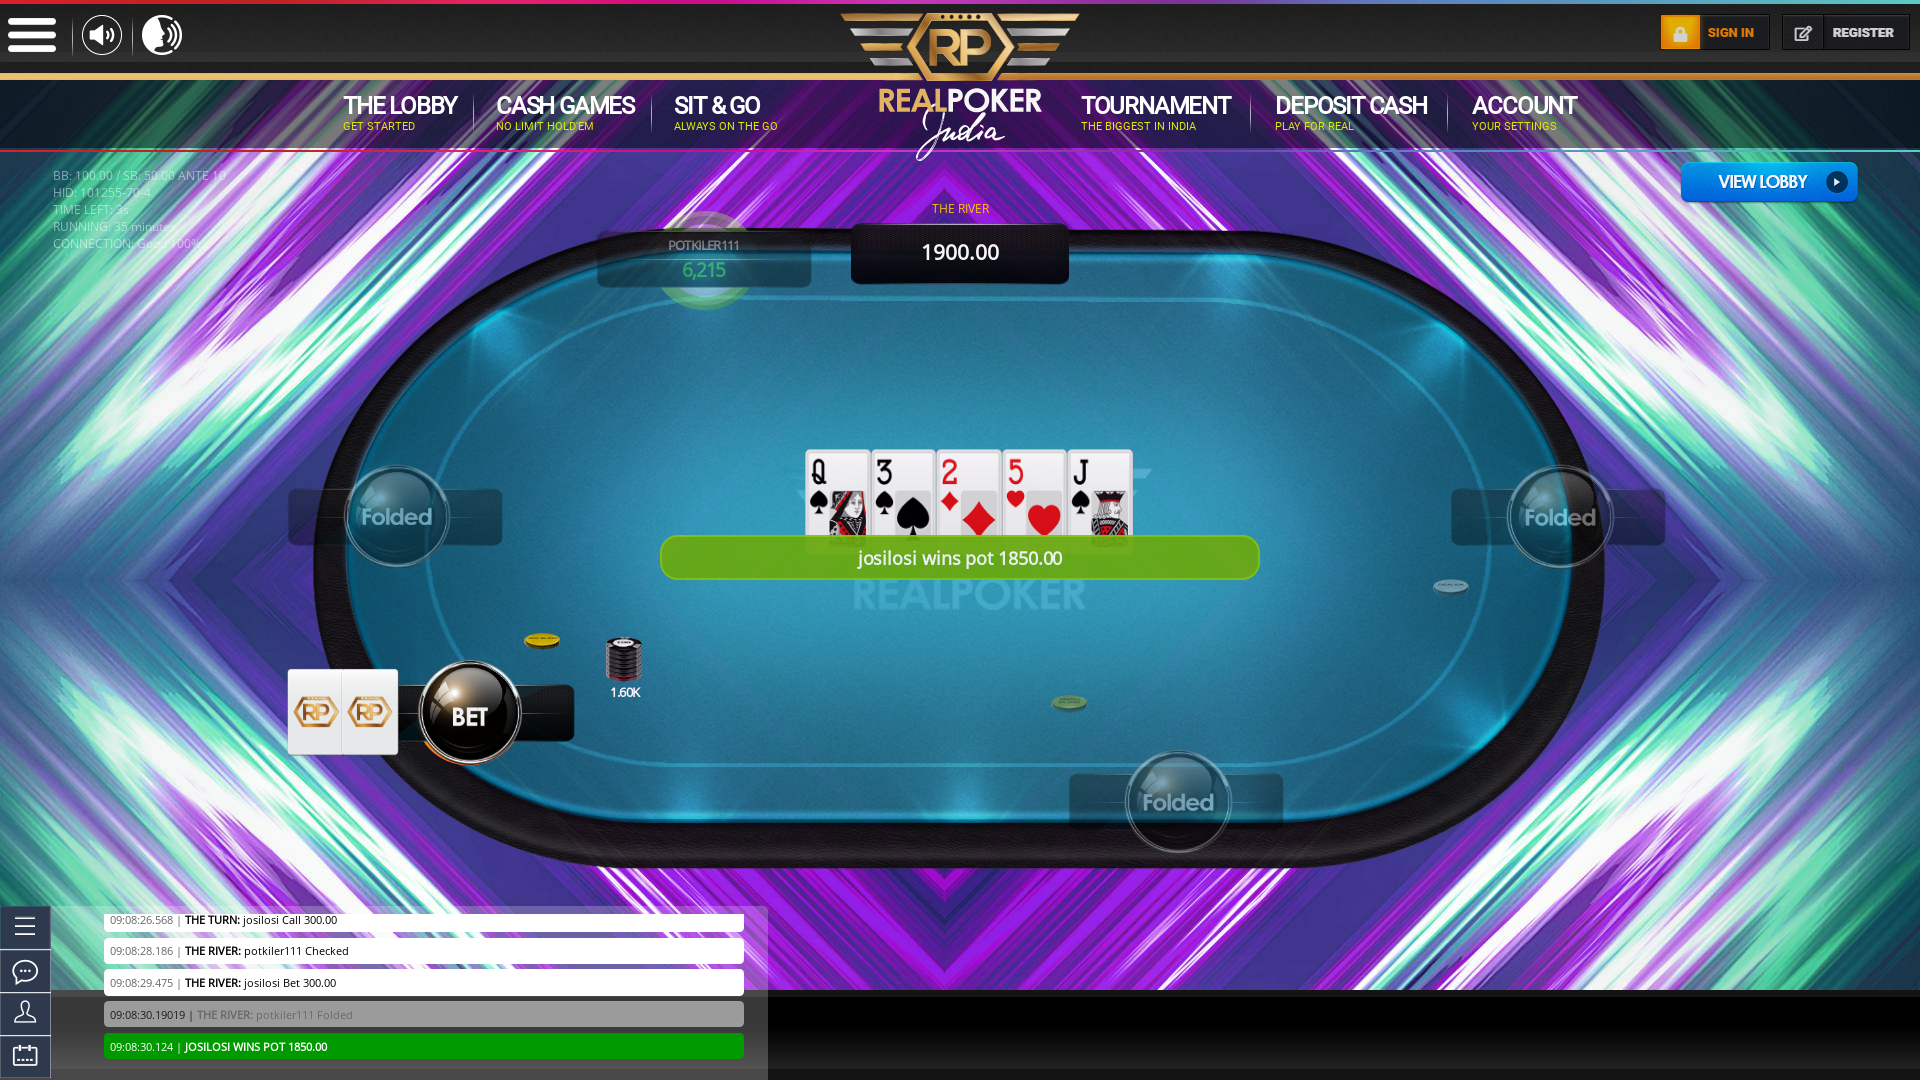 10 player poker in the 34th minute